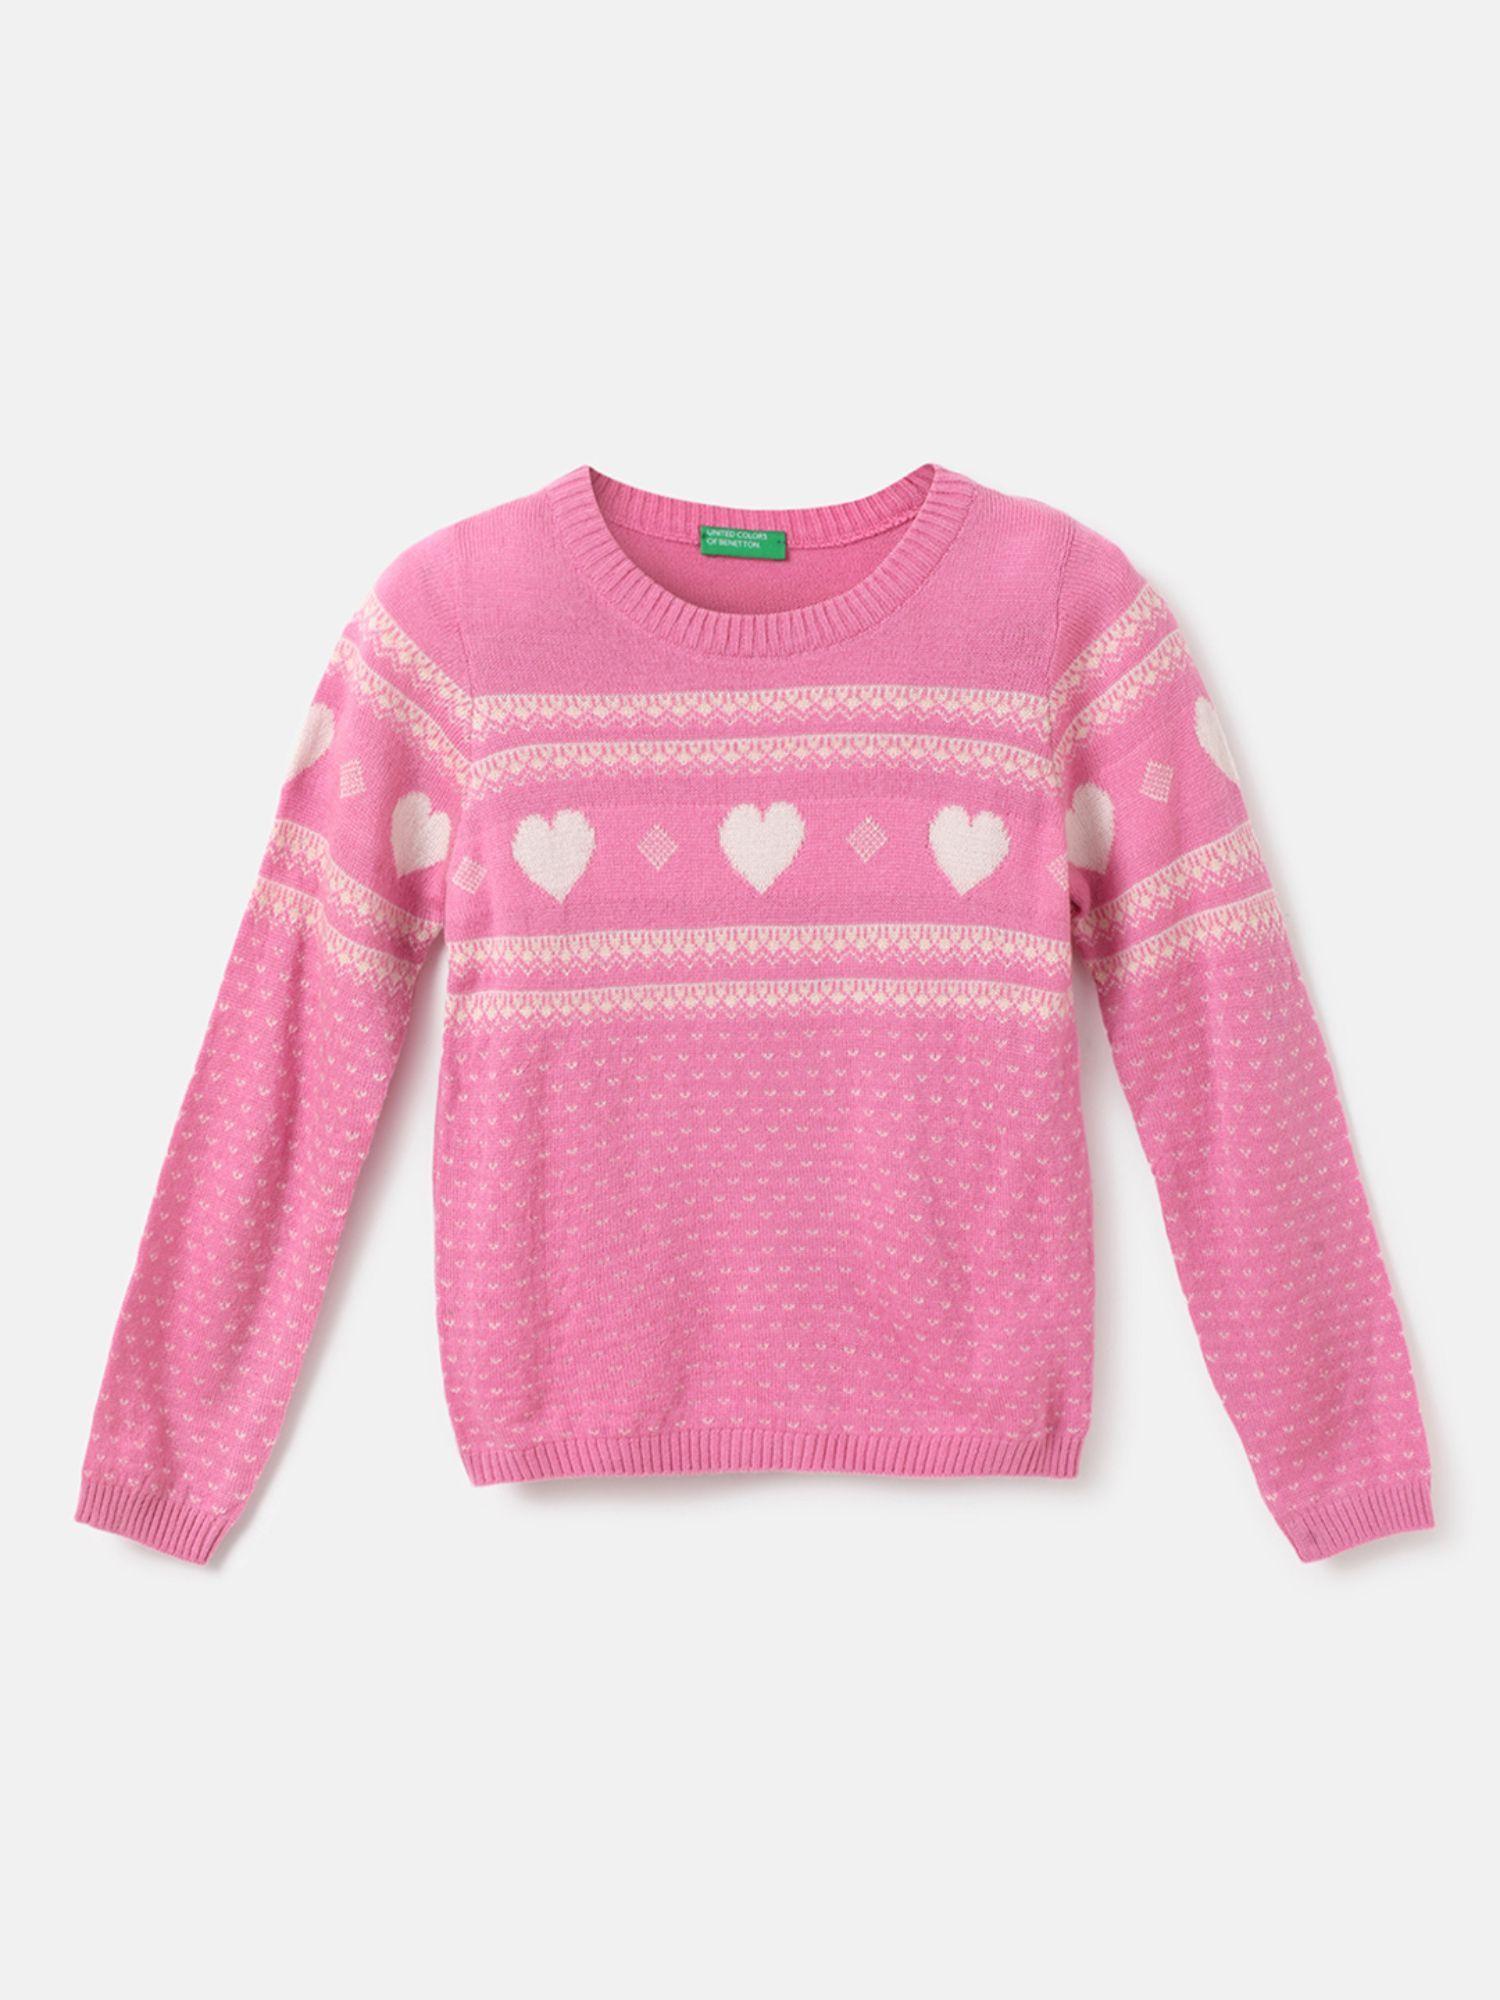 girls-patterned-round-neck-sweater